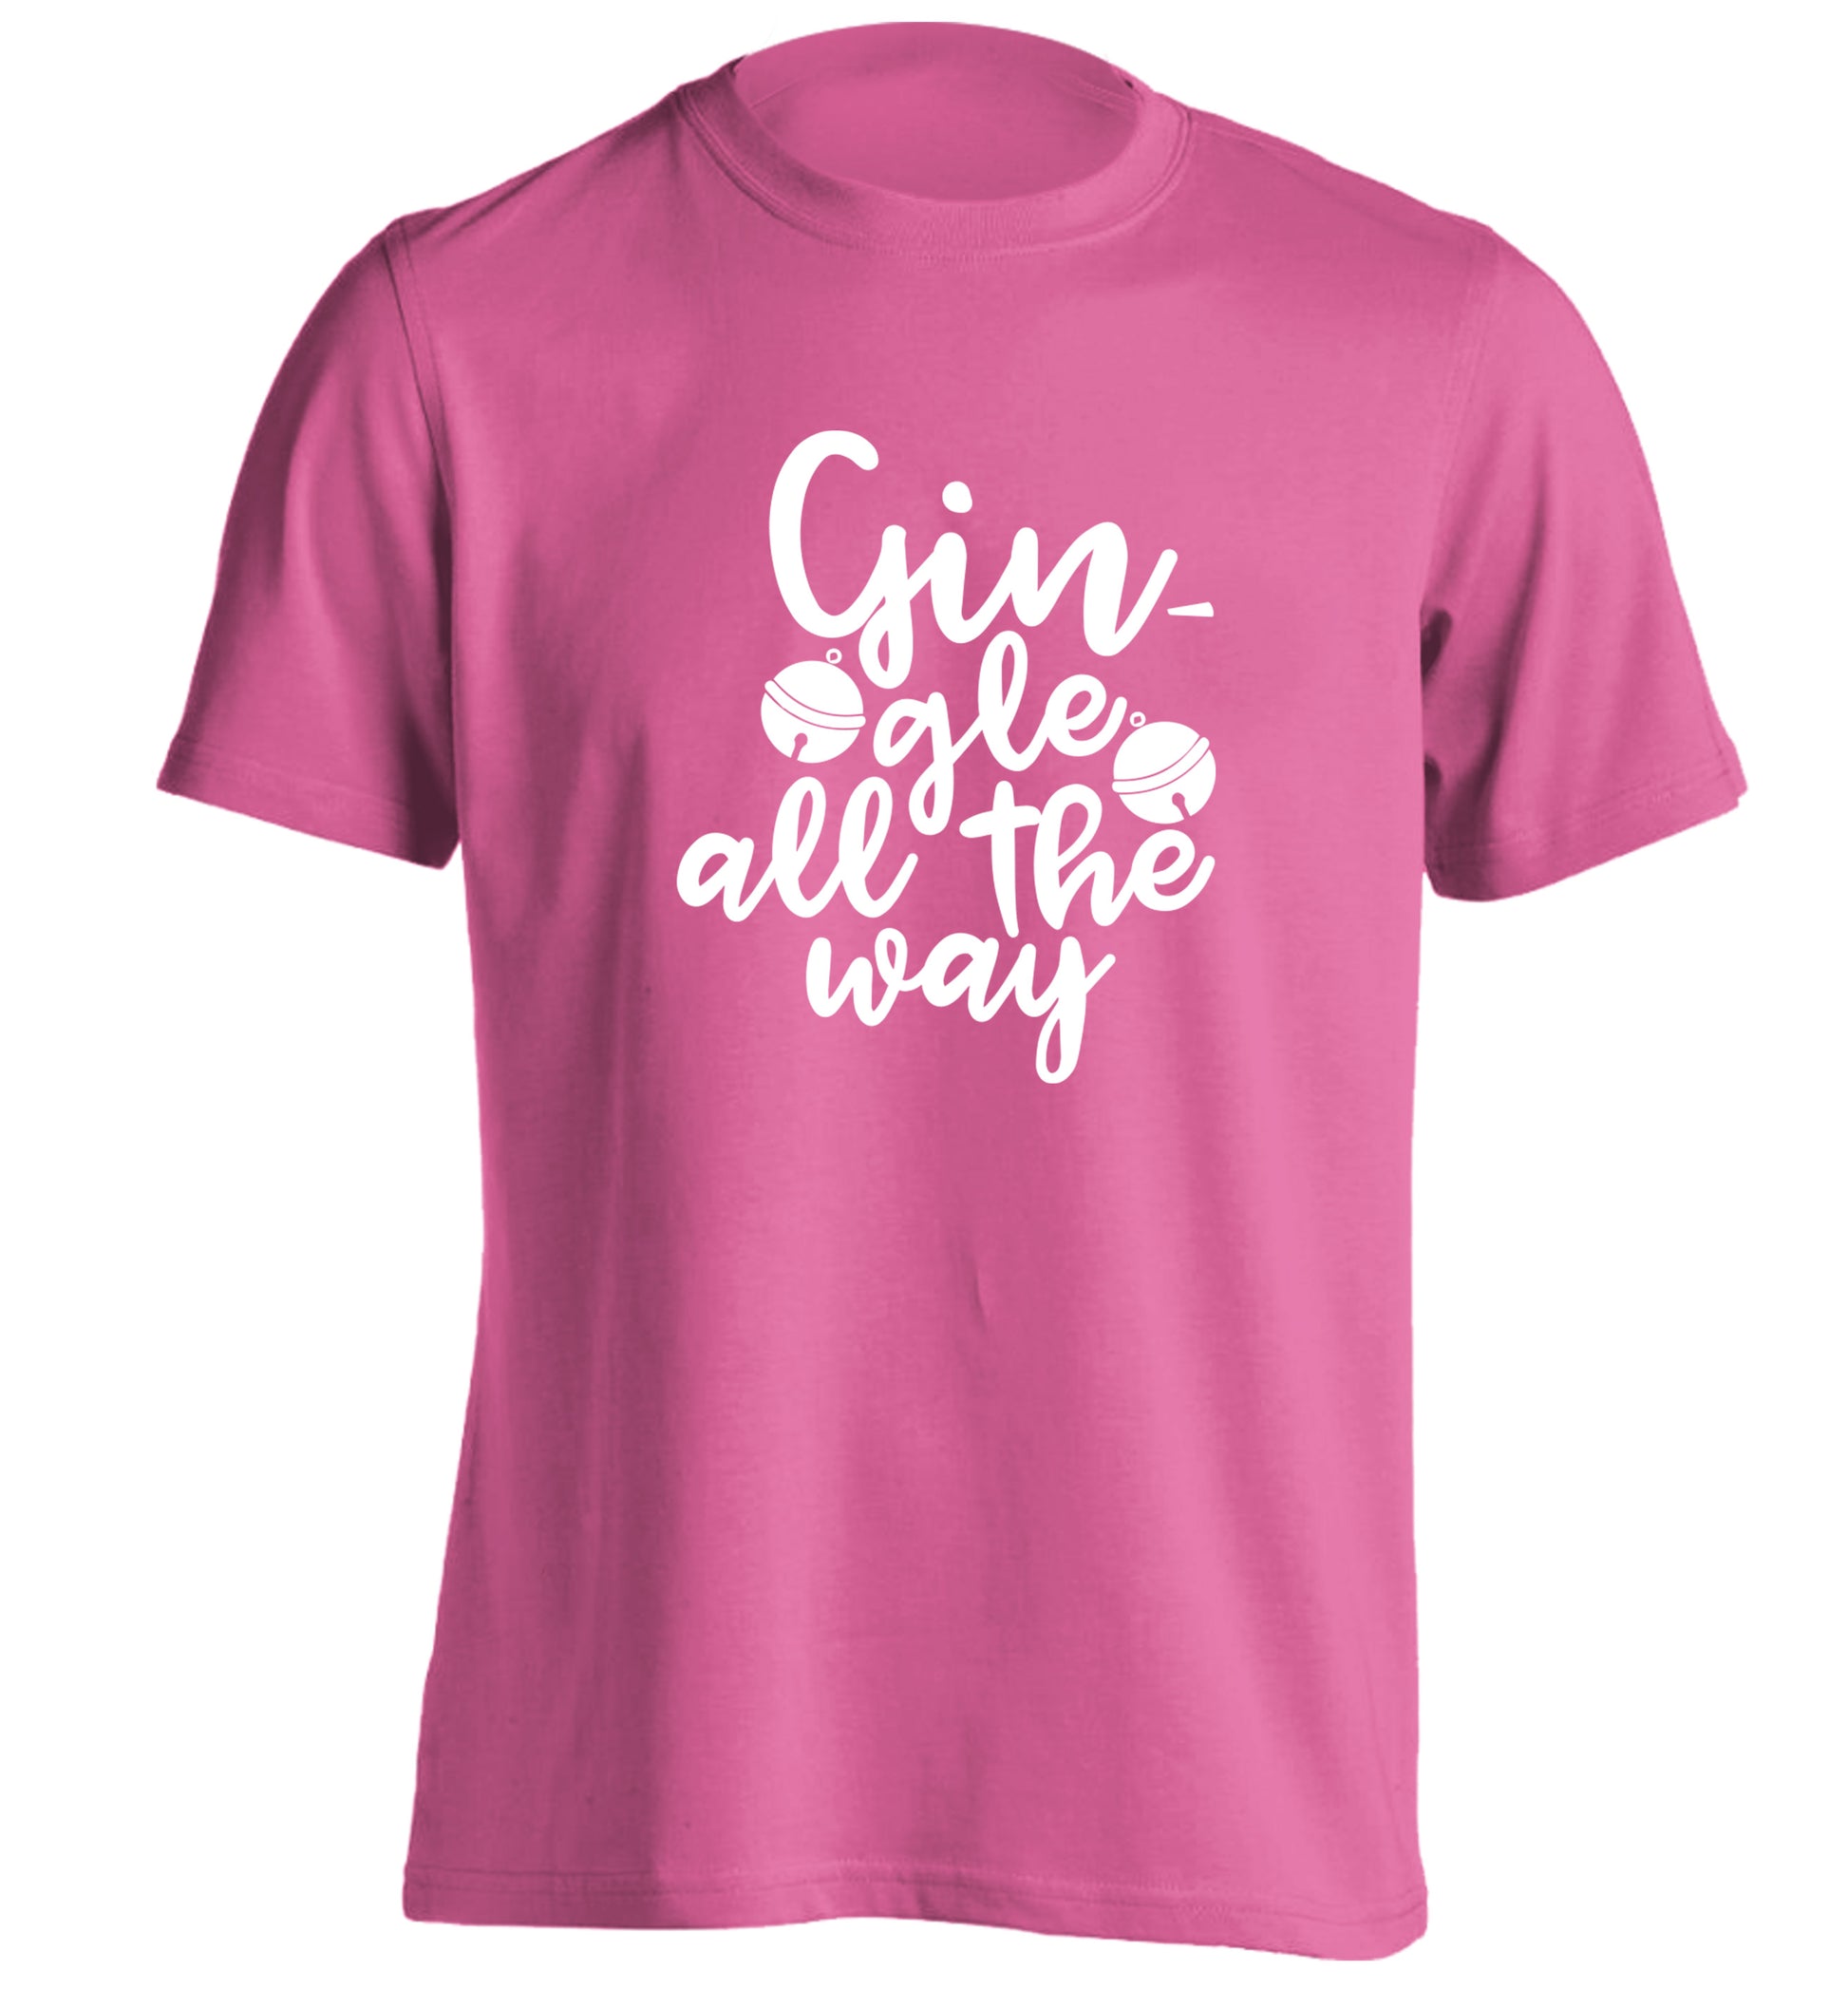 Gin-gle all the way adults unisex pink Tshirt 2XL